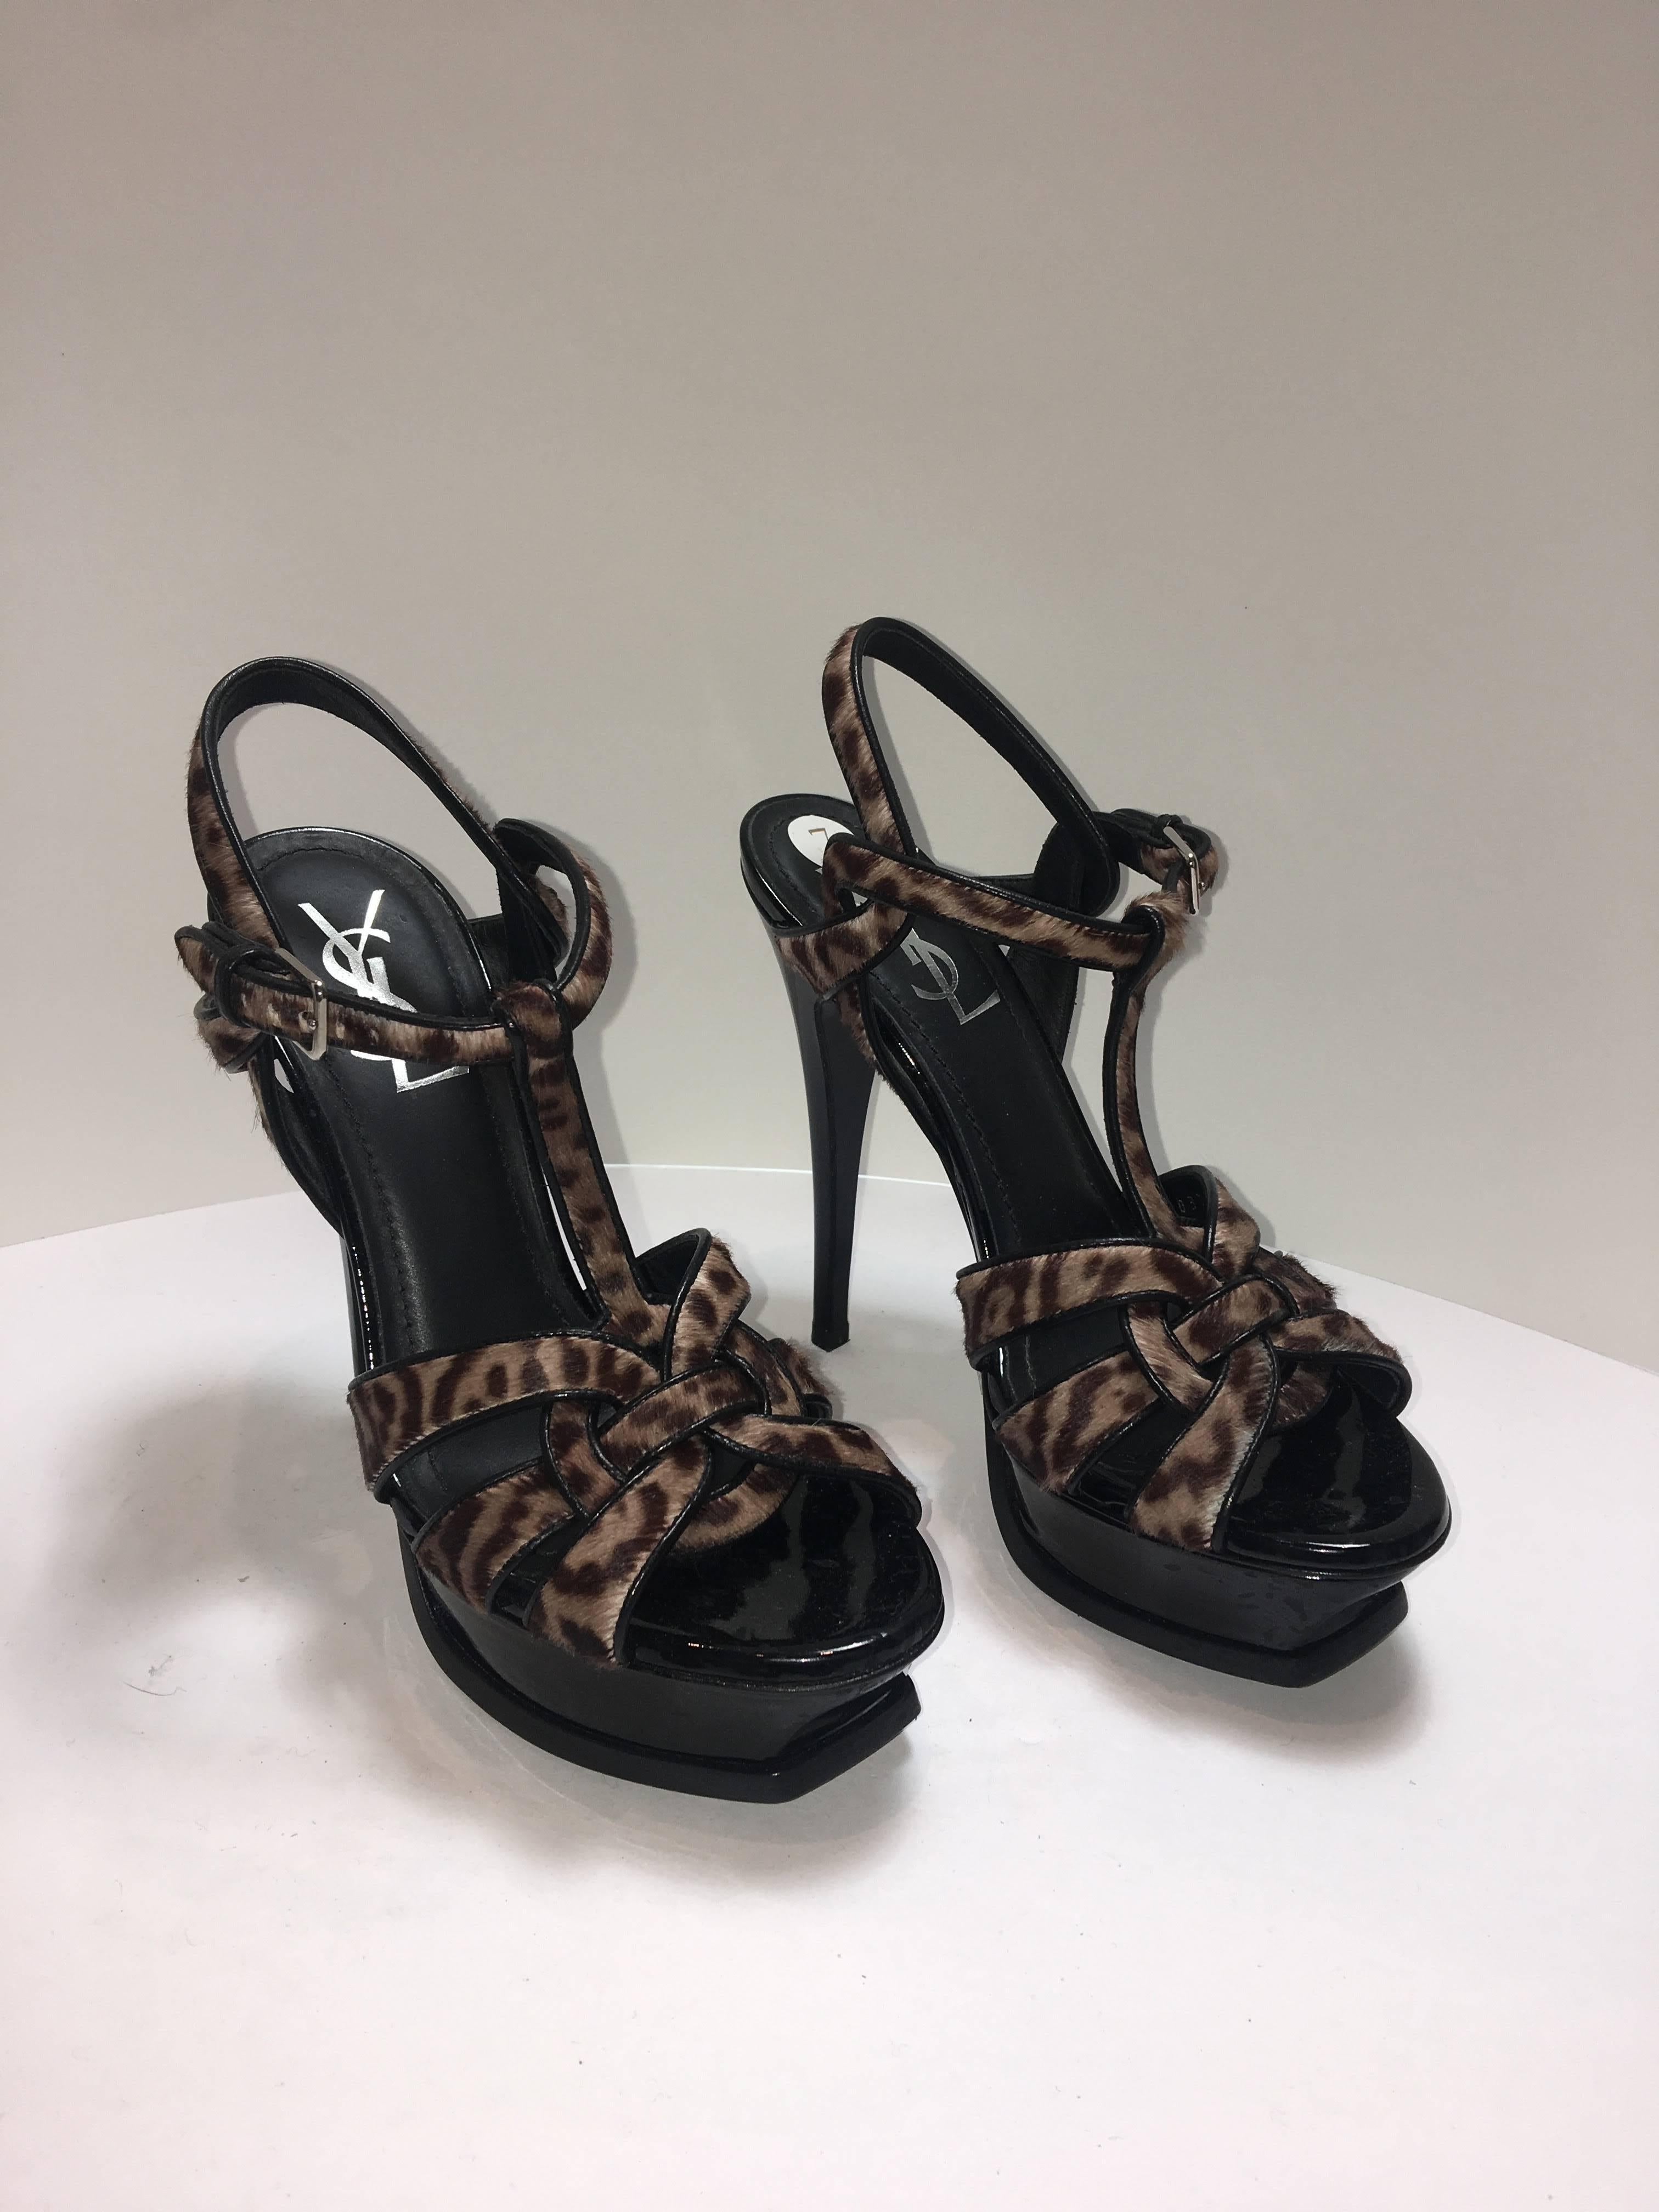 YSL Sandals in size 37. Brown/ Multi Print with Fur. Open toe and Platform sole. 